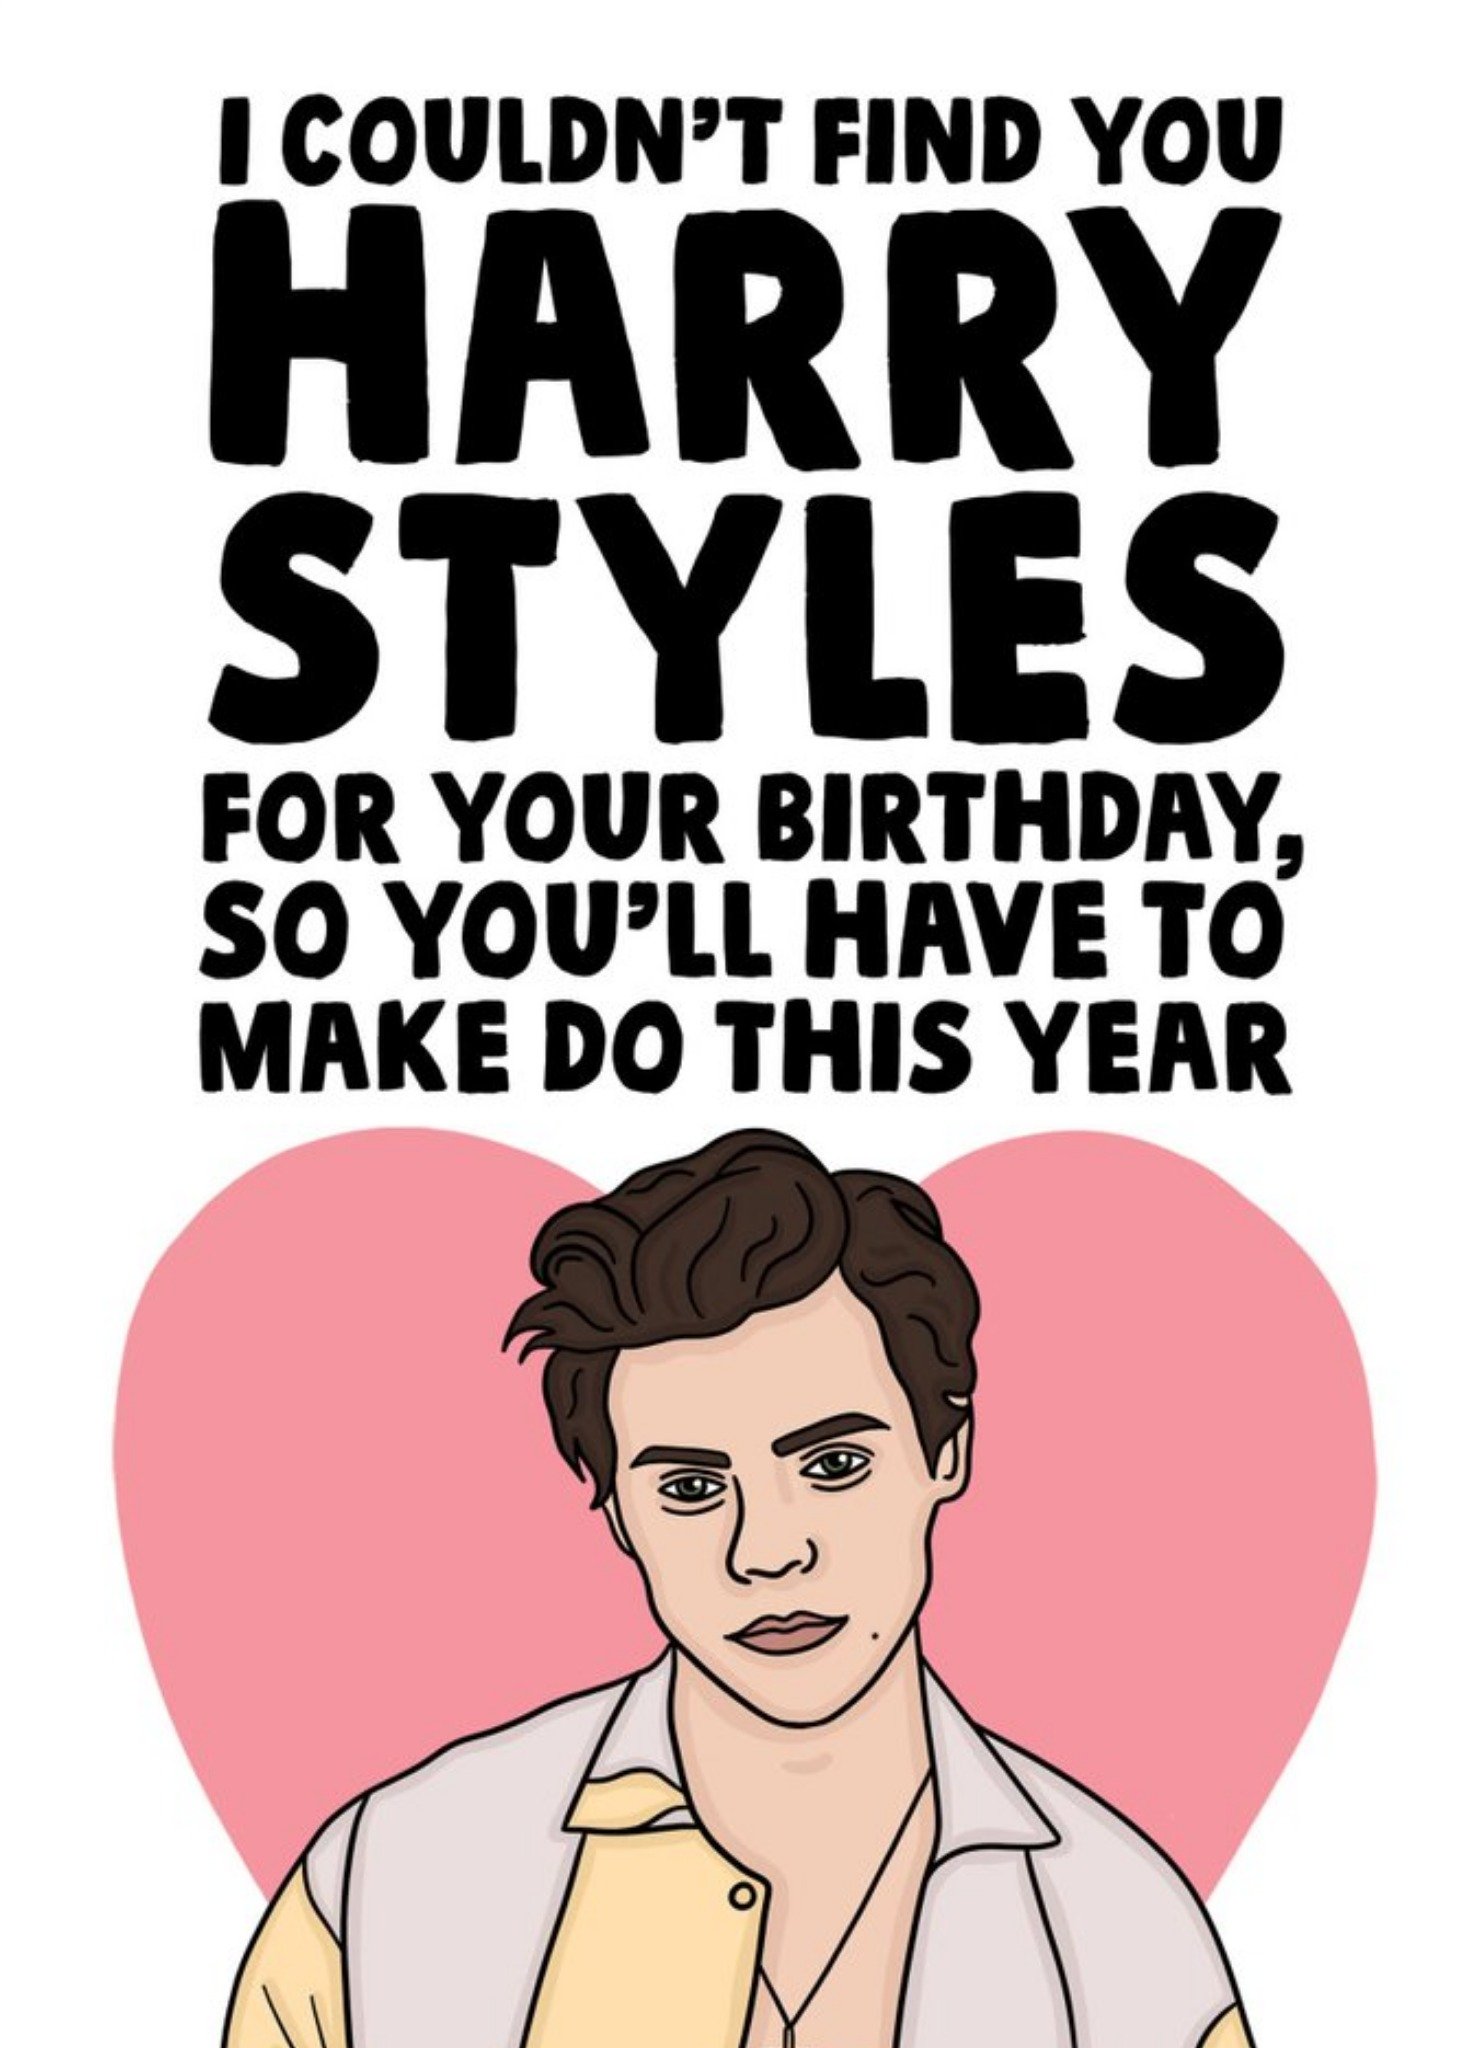 Moonpig Funny I Couldn't Find You Harry For Your Birthday So You'll Have To Make Do This Year Card, 